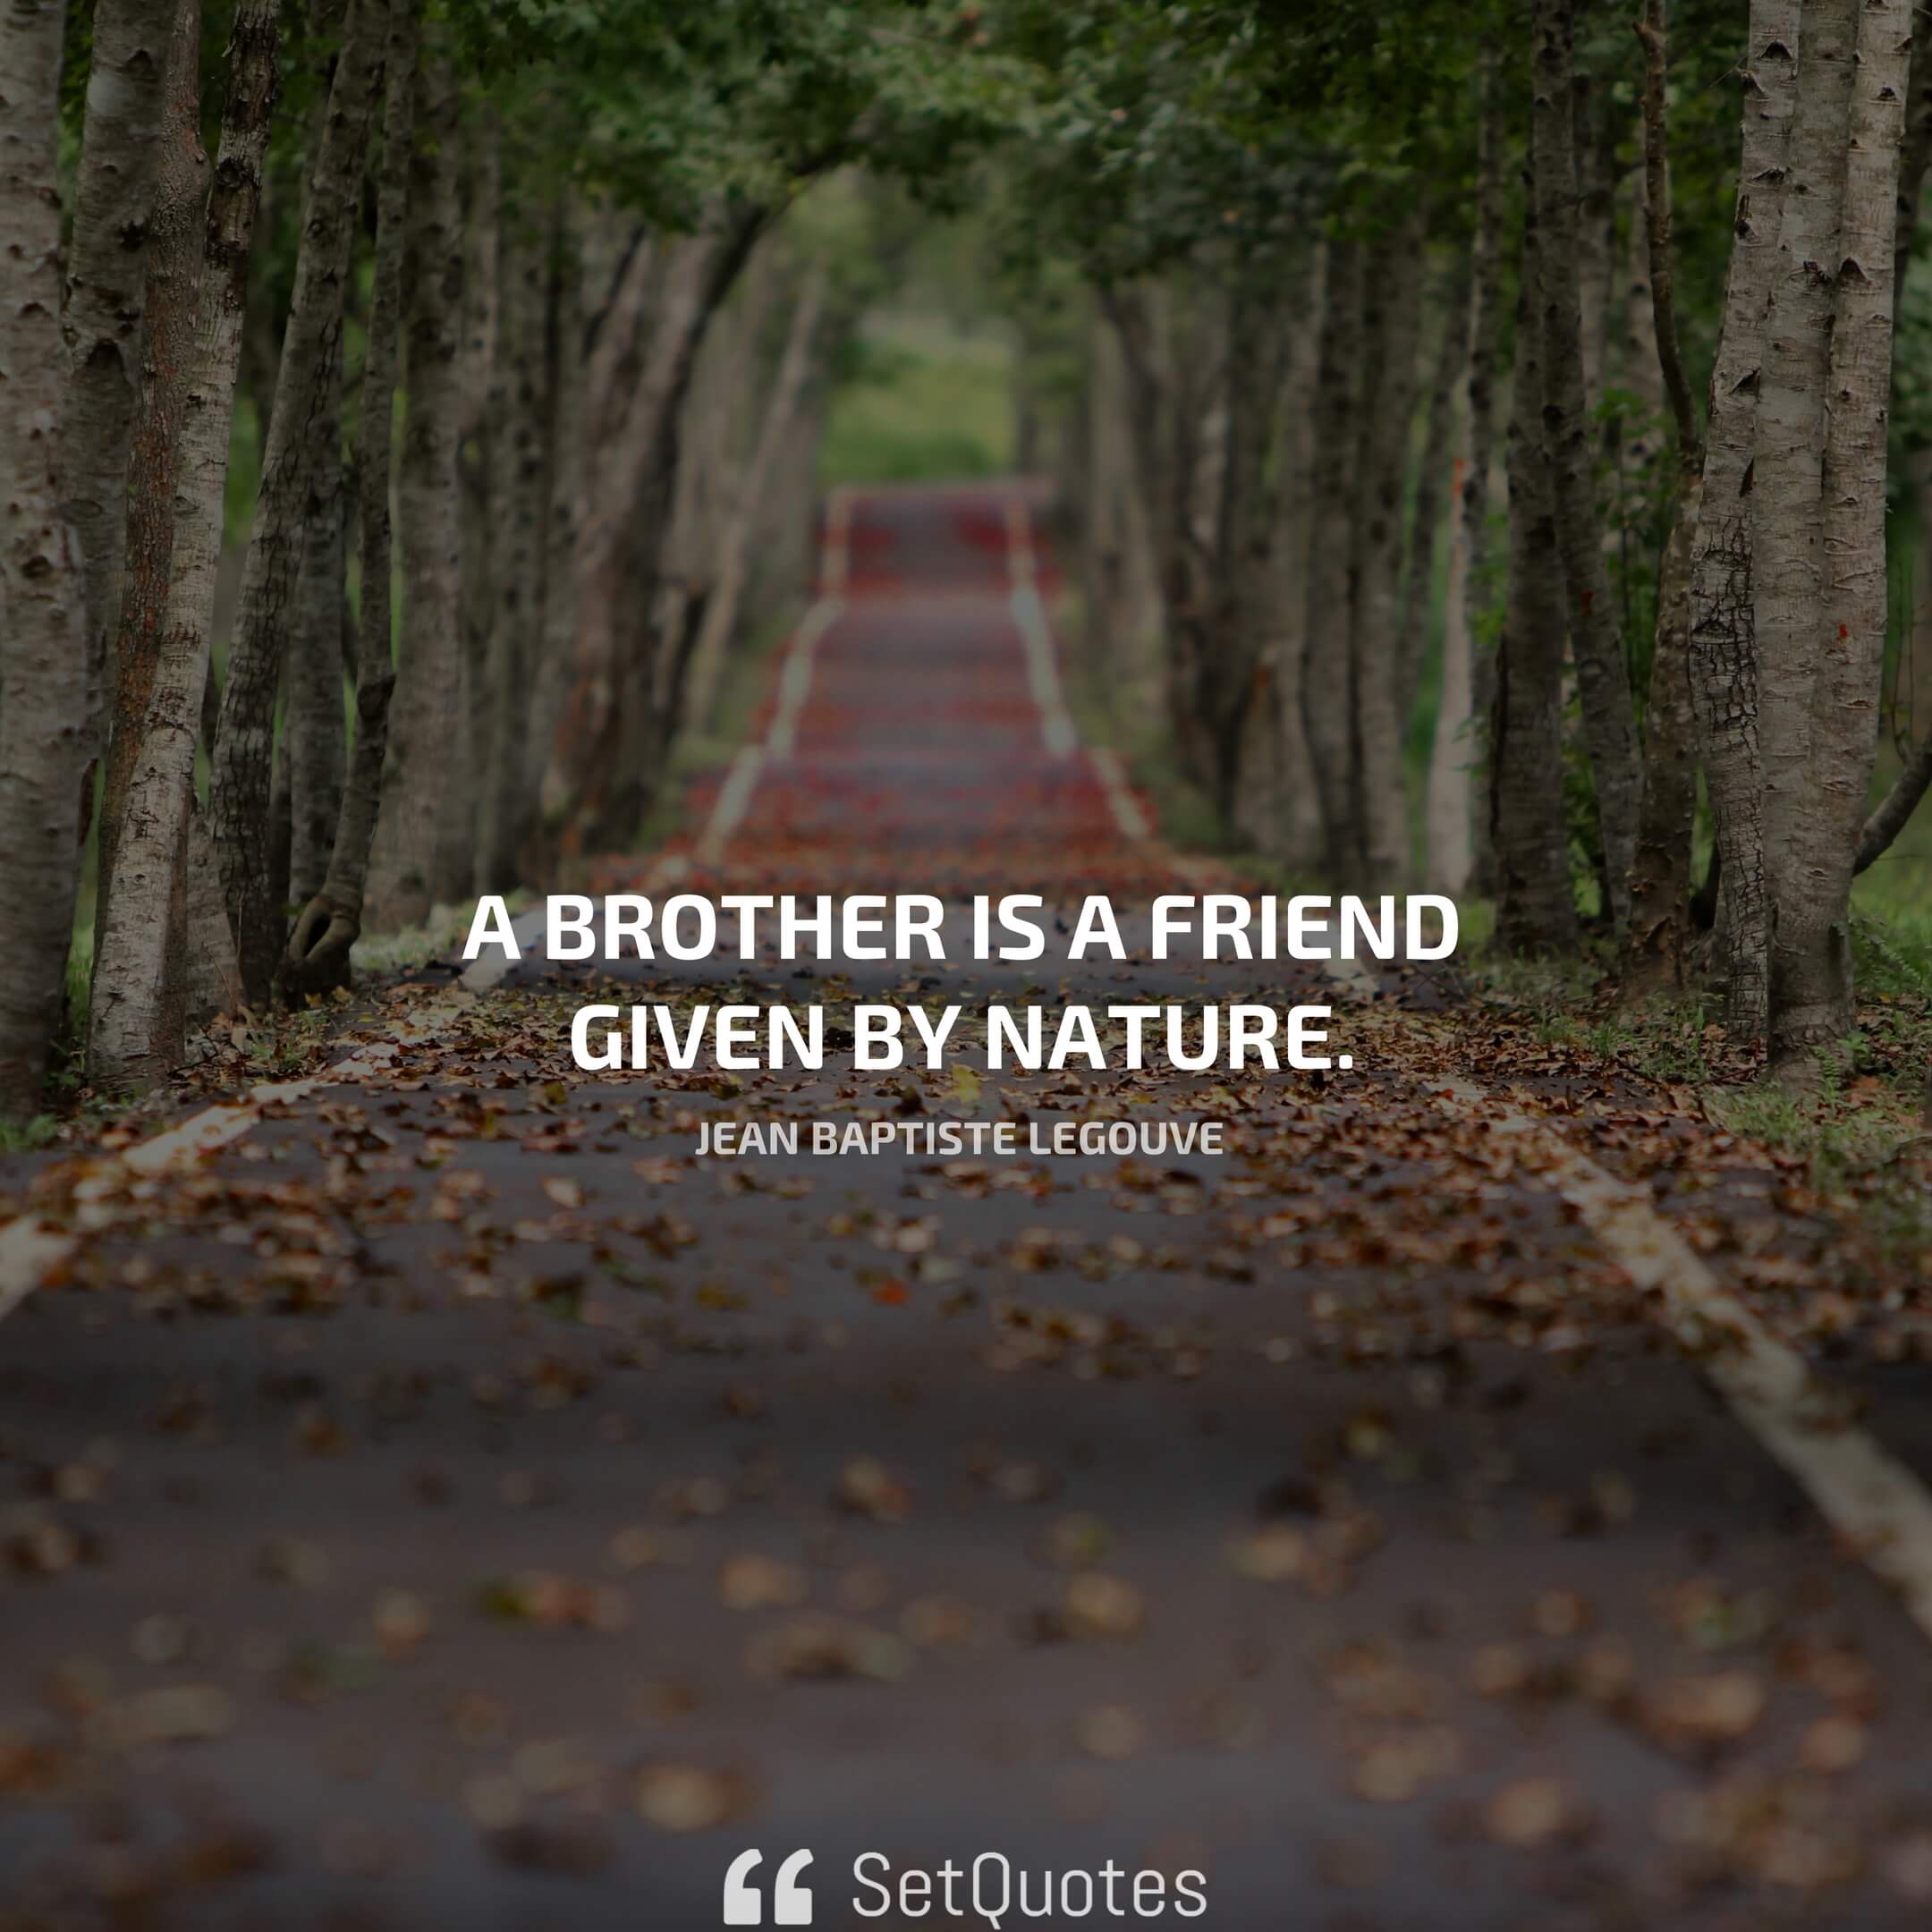 “A brother is a friend given by Nature.” – Jean Baptiste Legouve